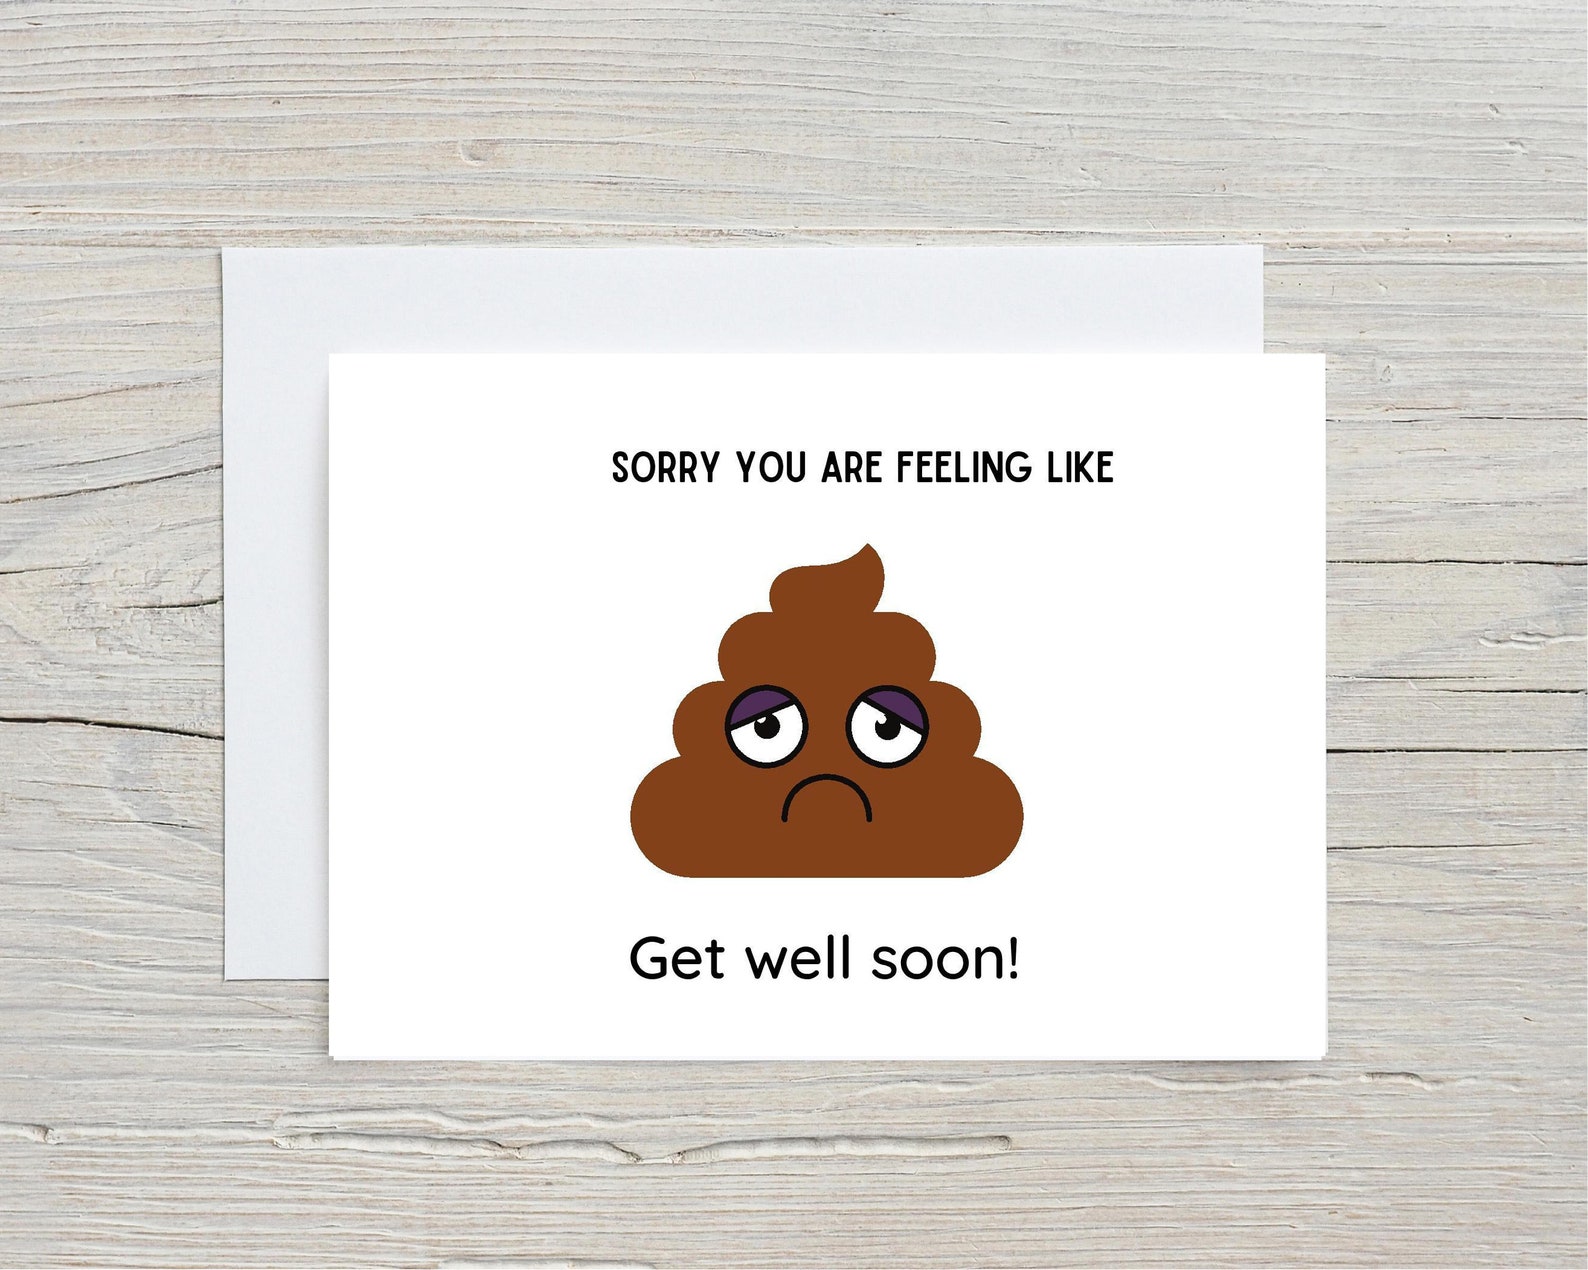 Funny poop emoji get well soon card Funny well wishes card | Etsy